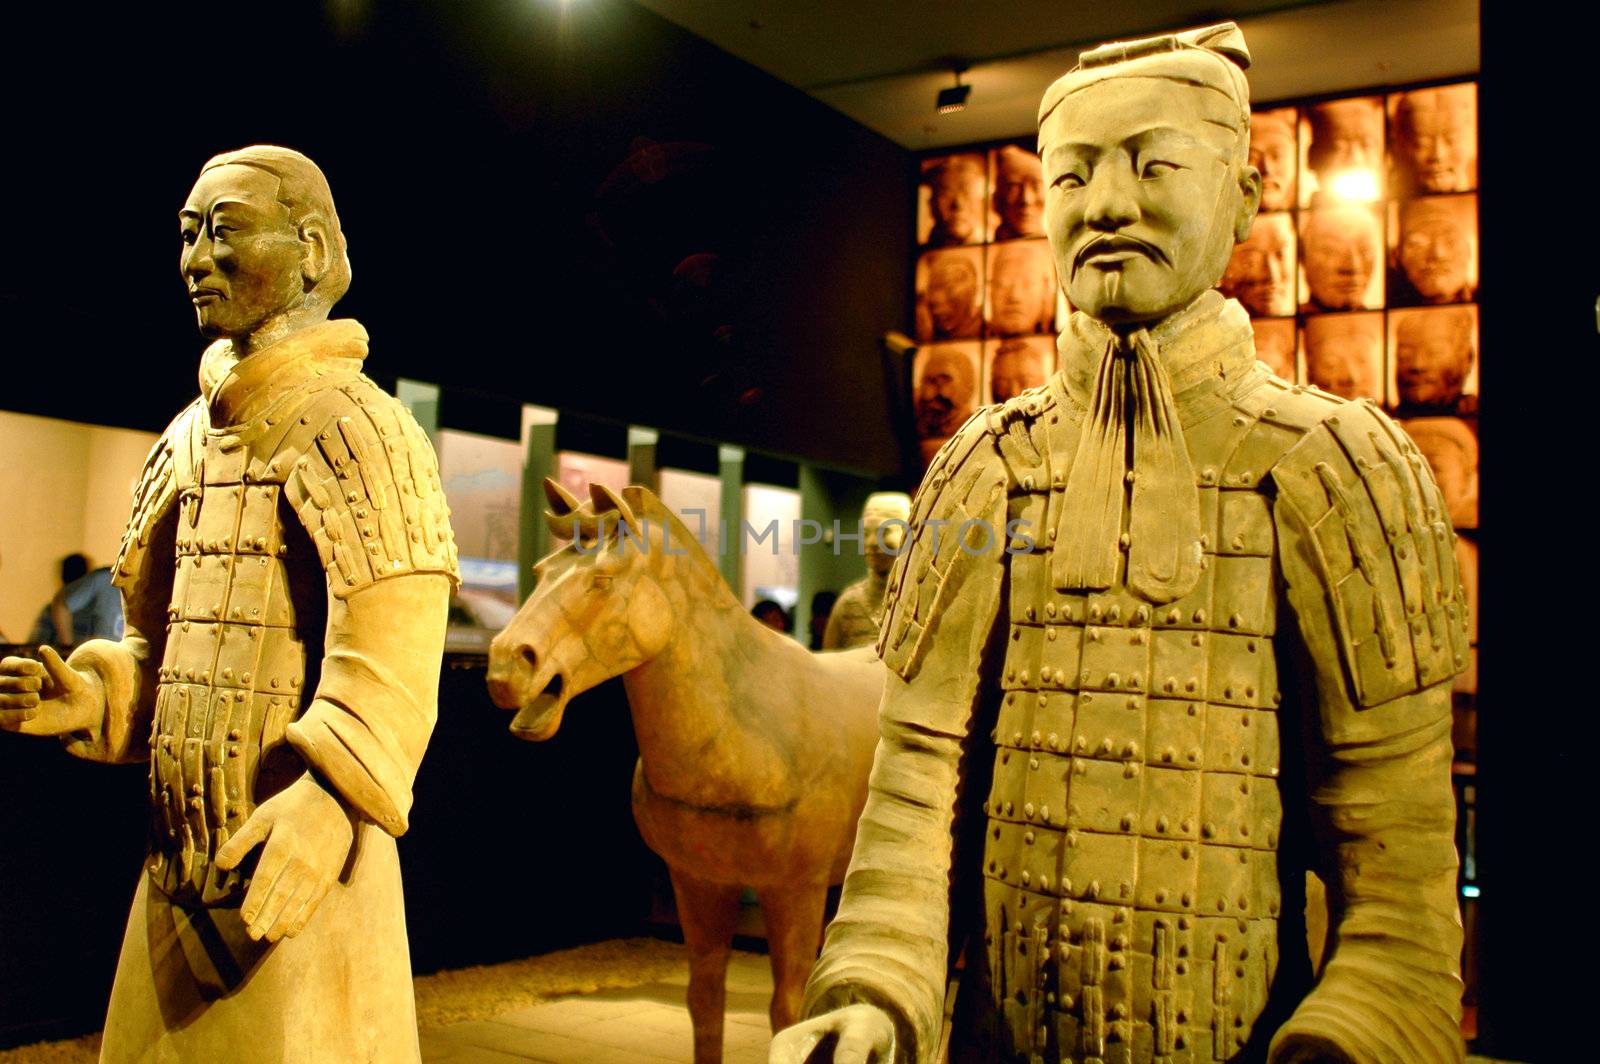 Terracotta warriors and horses by bbbar